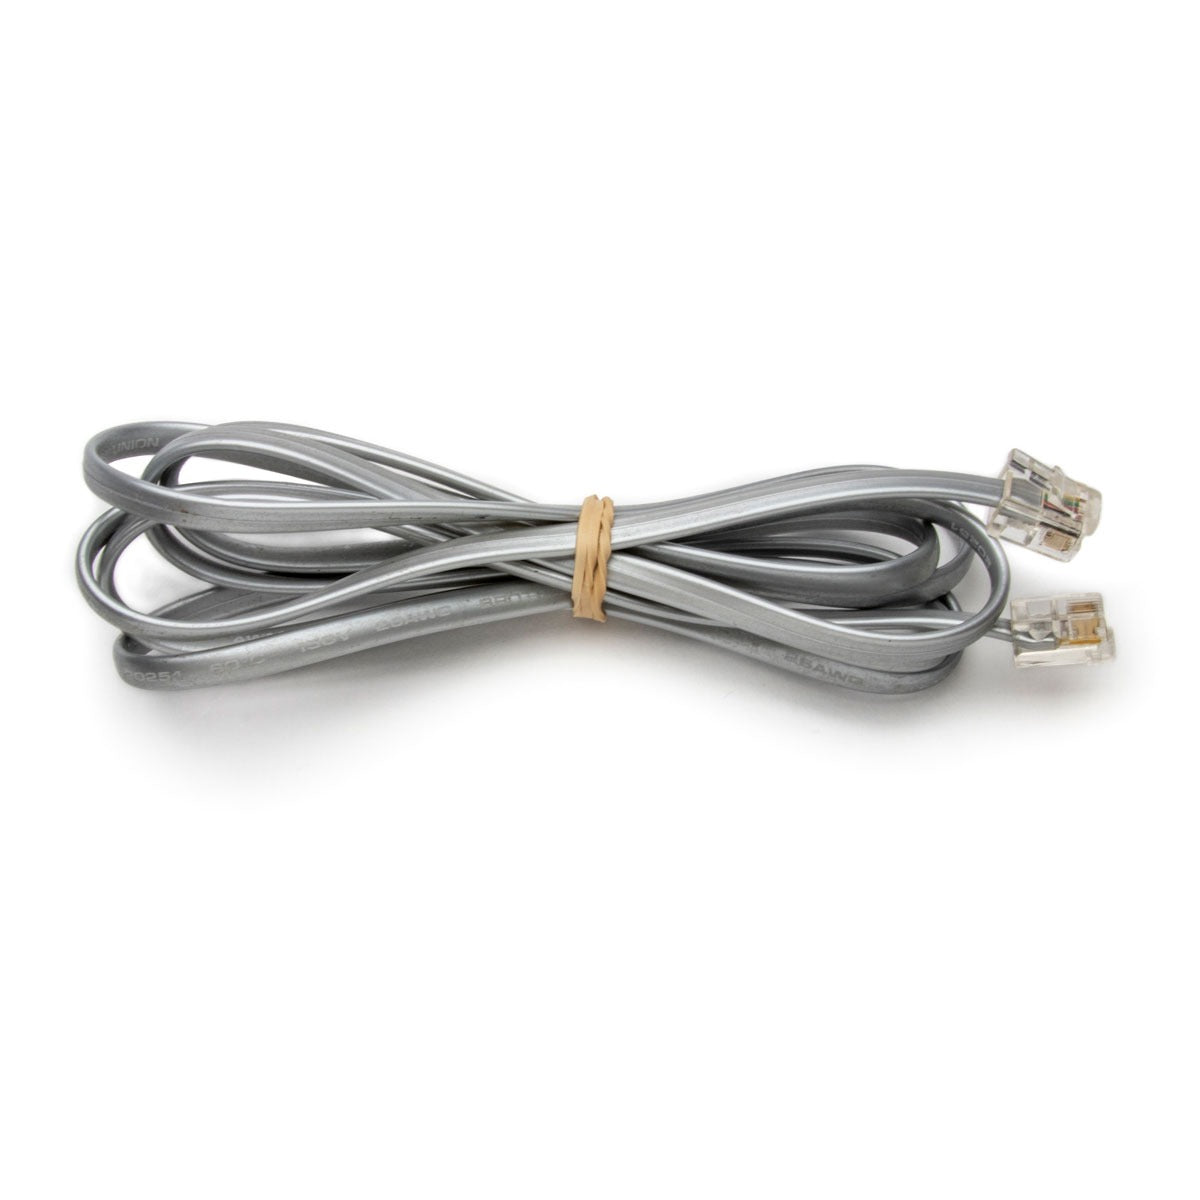 Pump-to-pump Network Cable, 25 ft